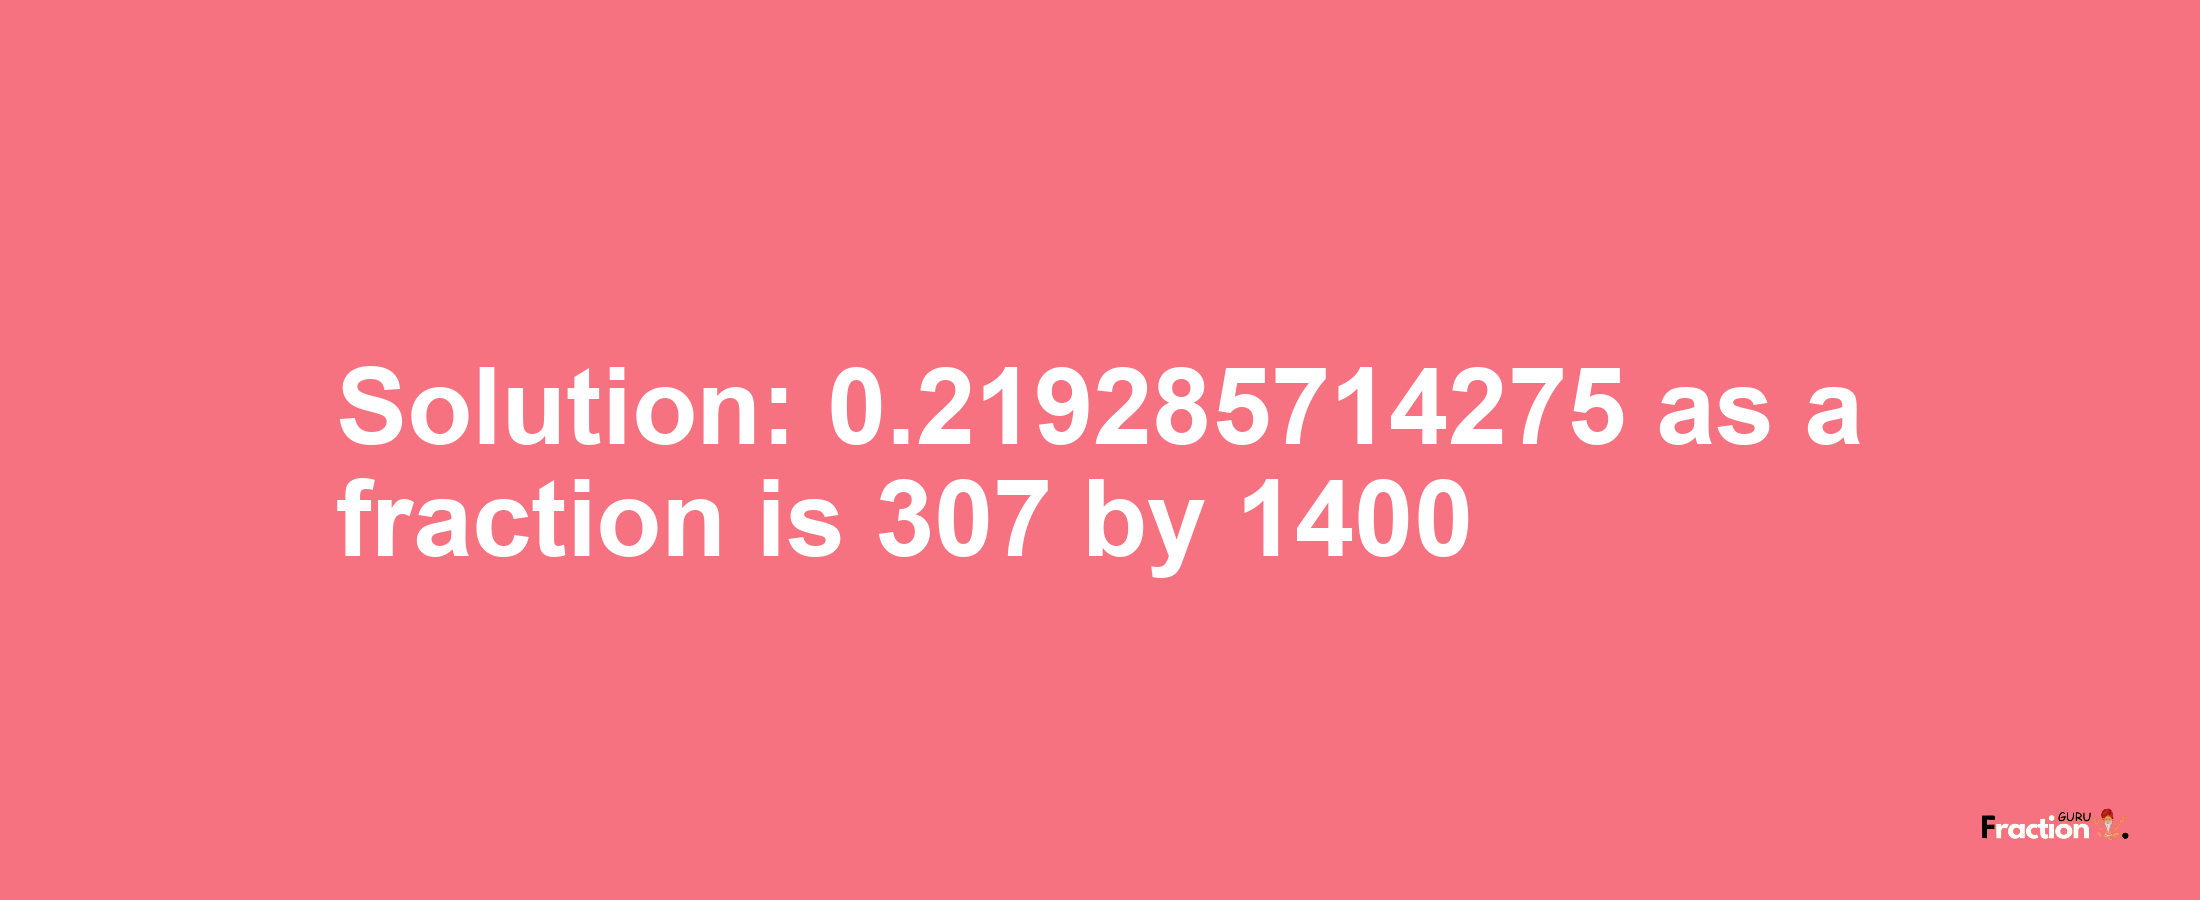 Solution:0.219285714275 as a fraction is 307/1400